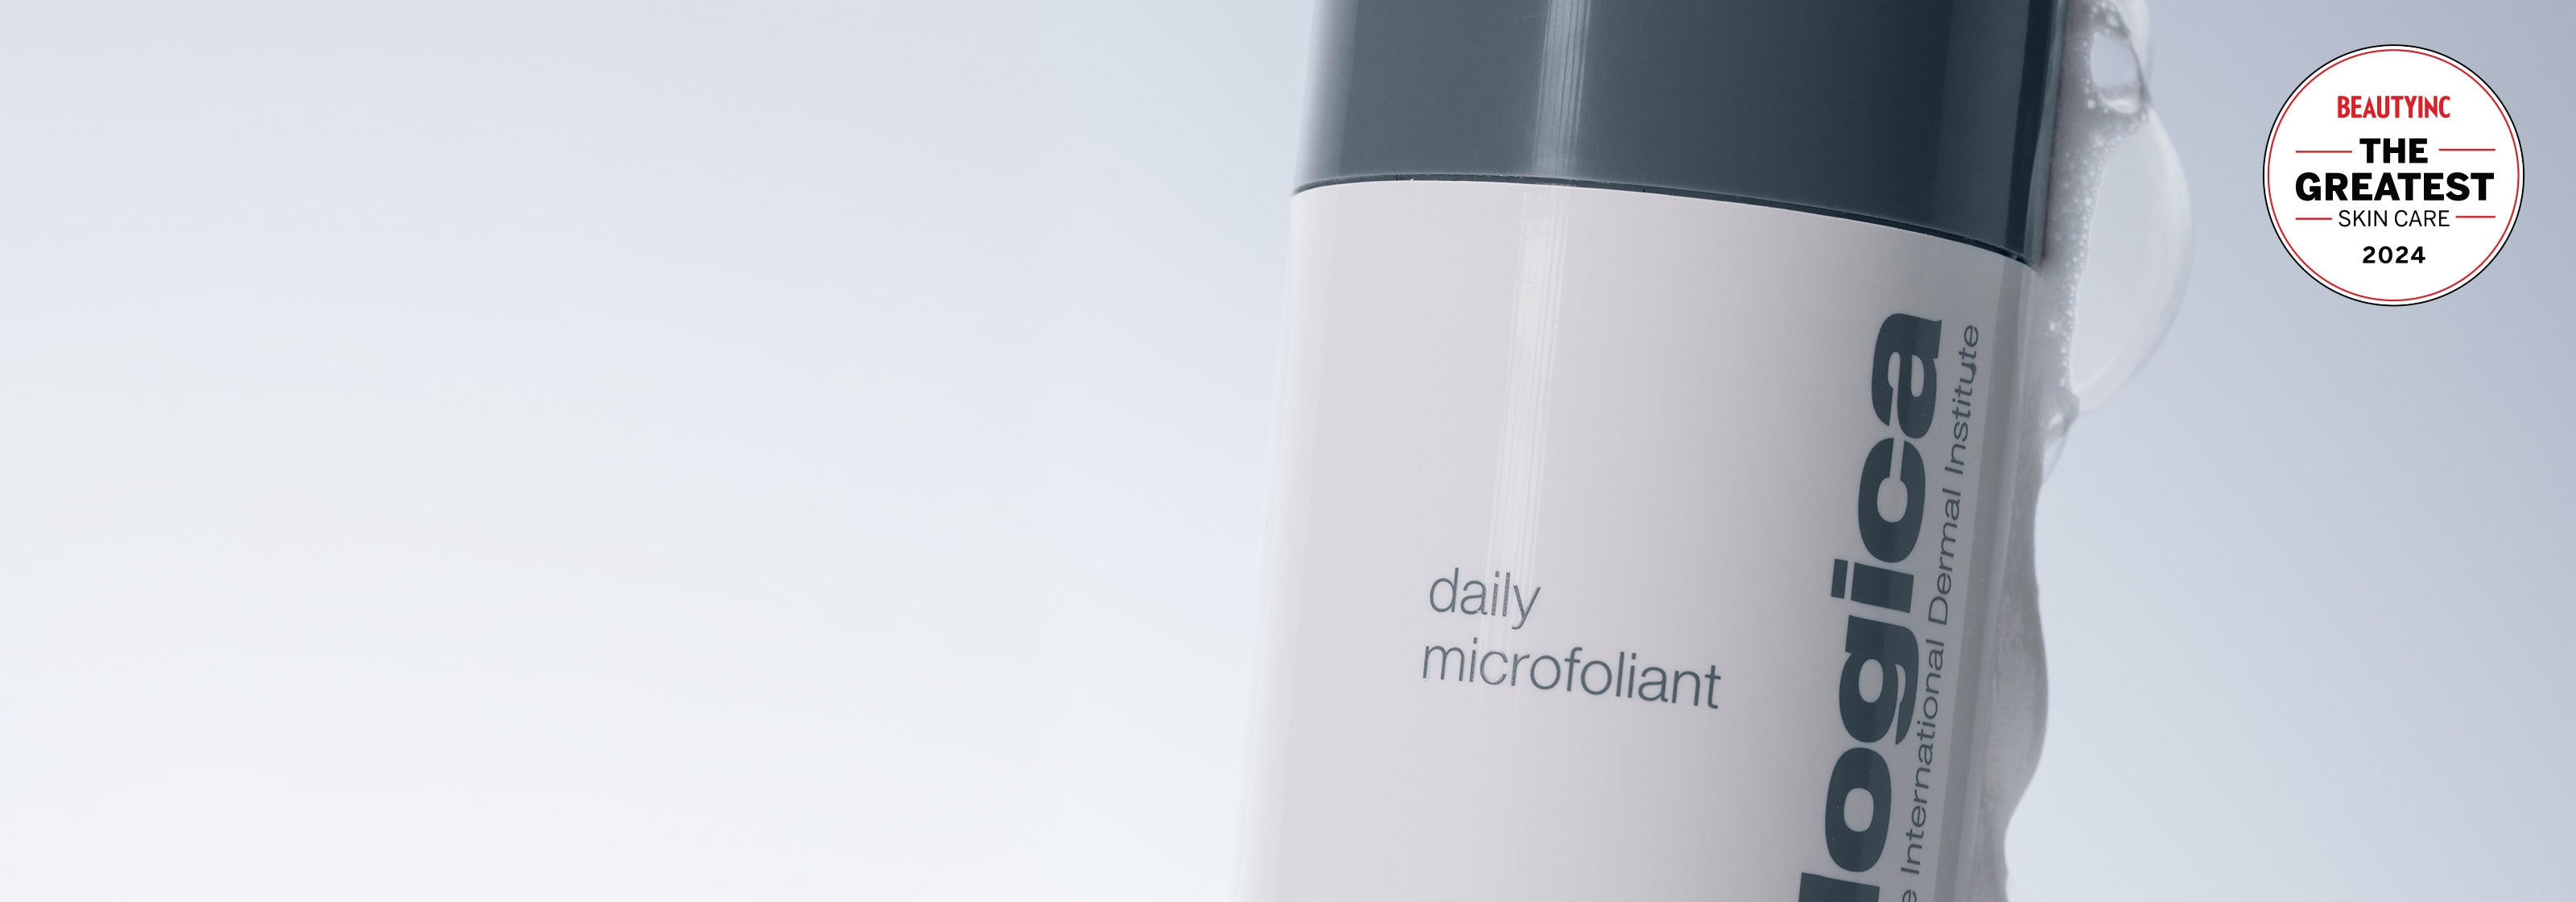 Daily Mic, improve skin smoothness and reduce blackheads after  just 1 use - desktop